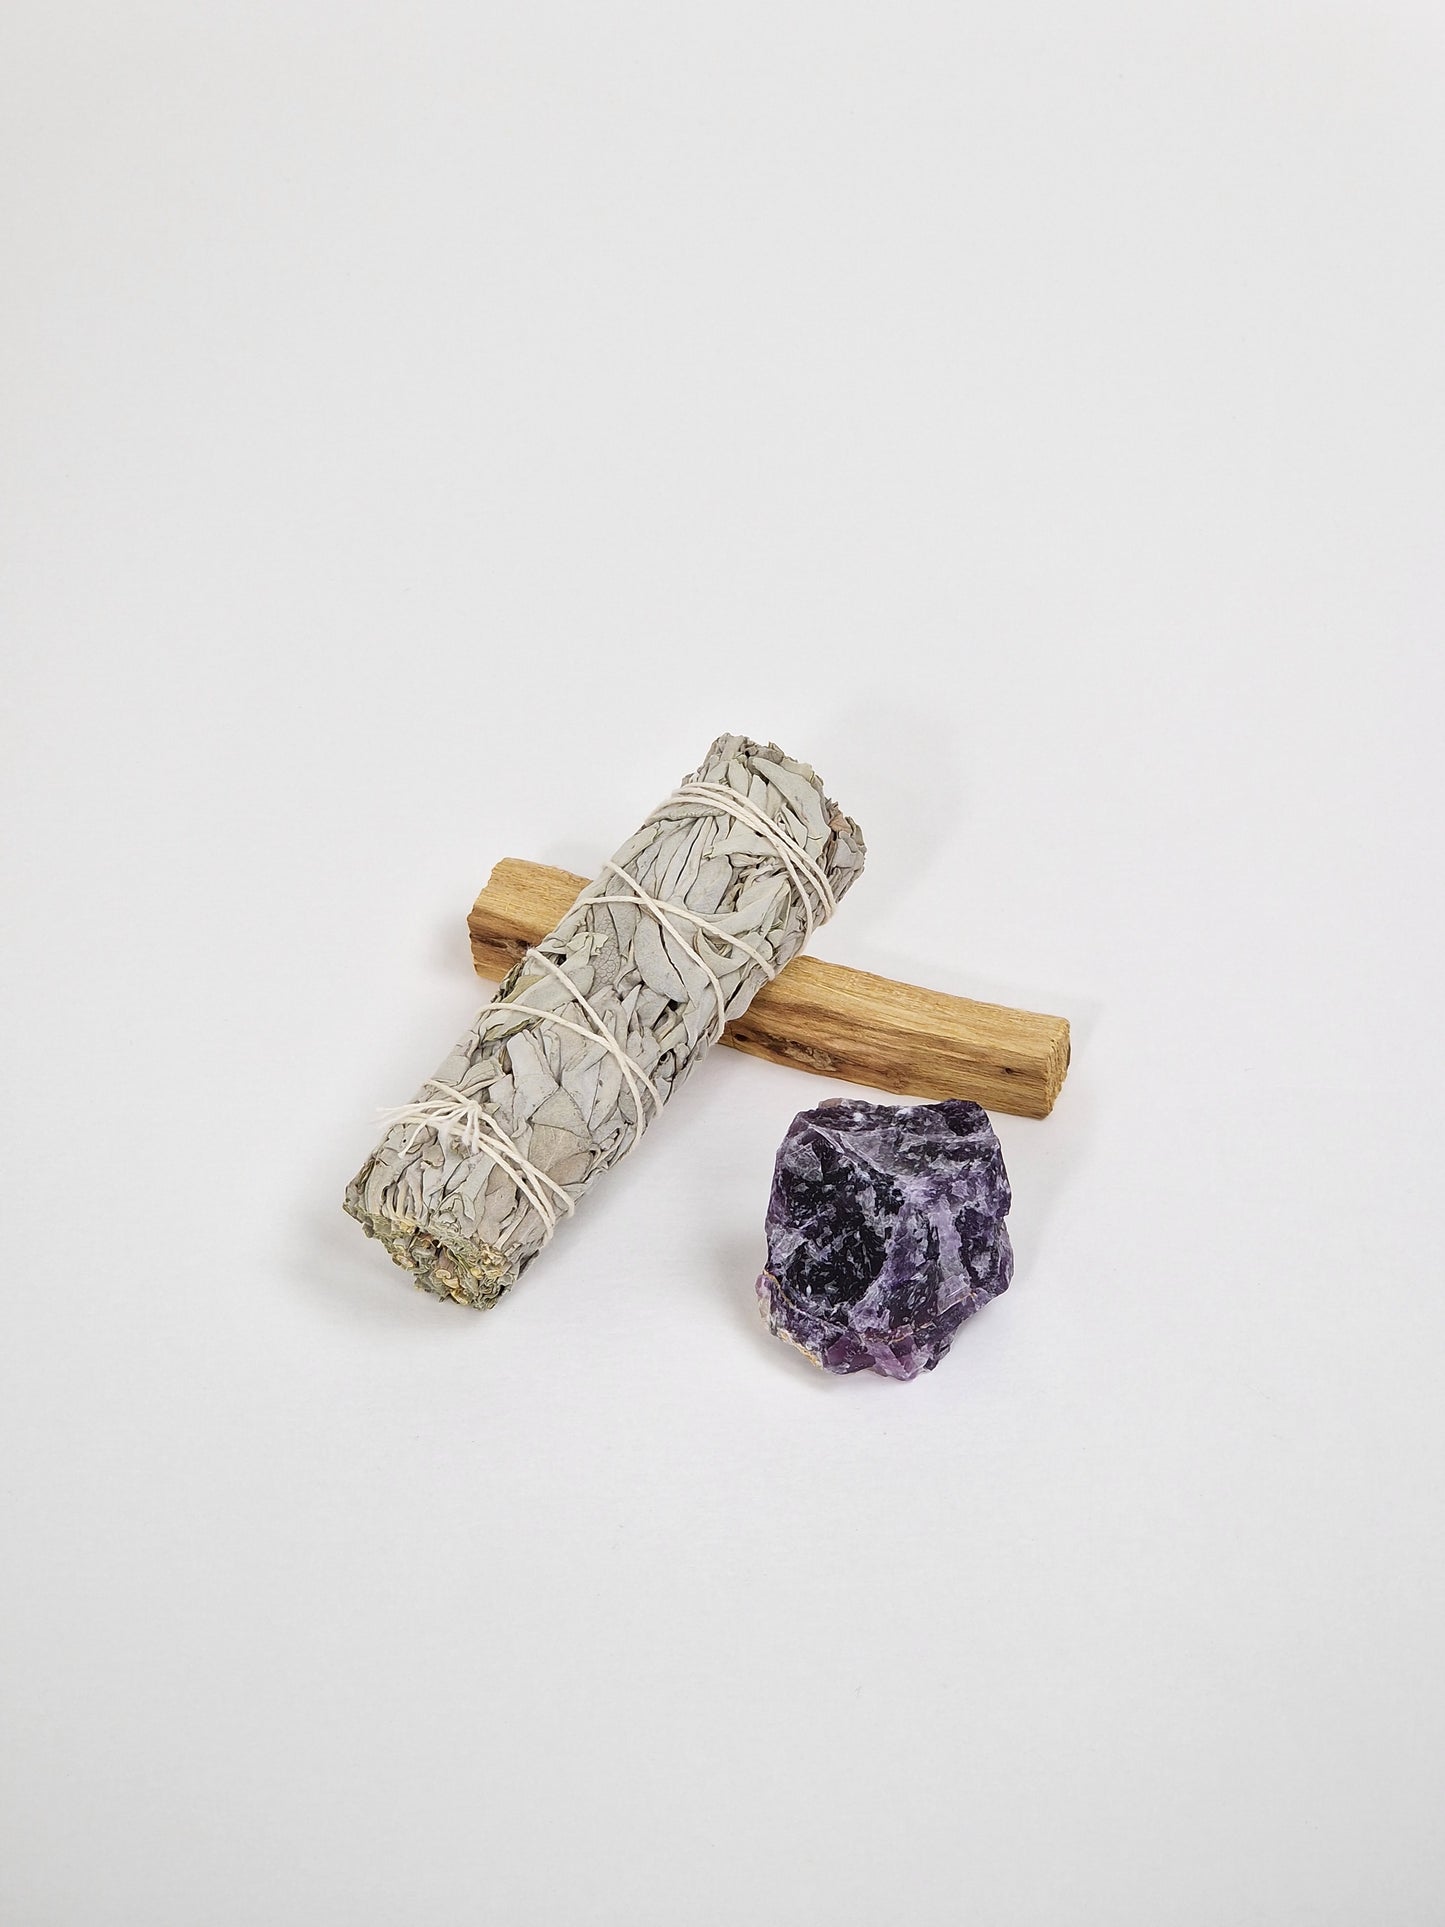 Ametrine crystal with sage and smudge stick